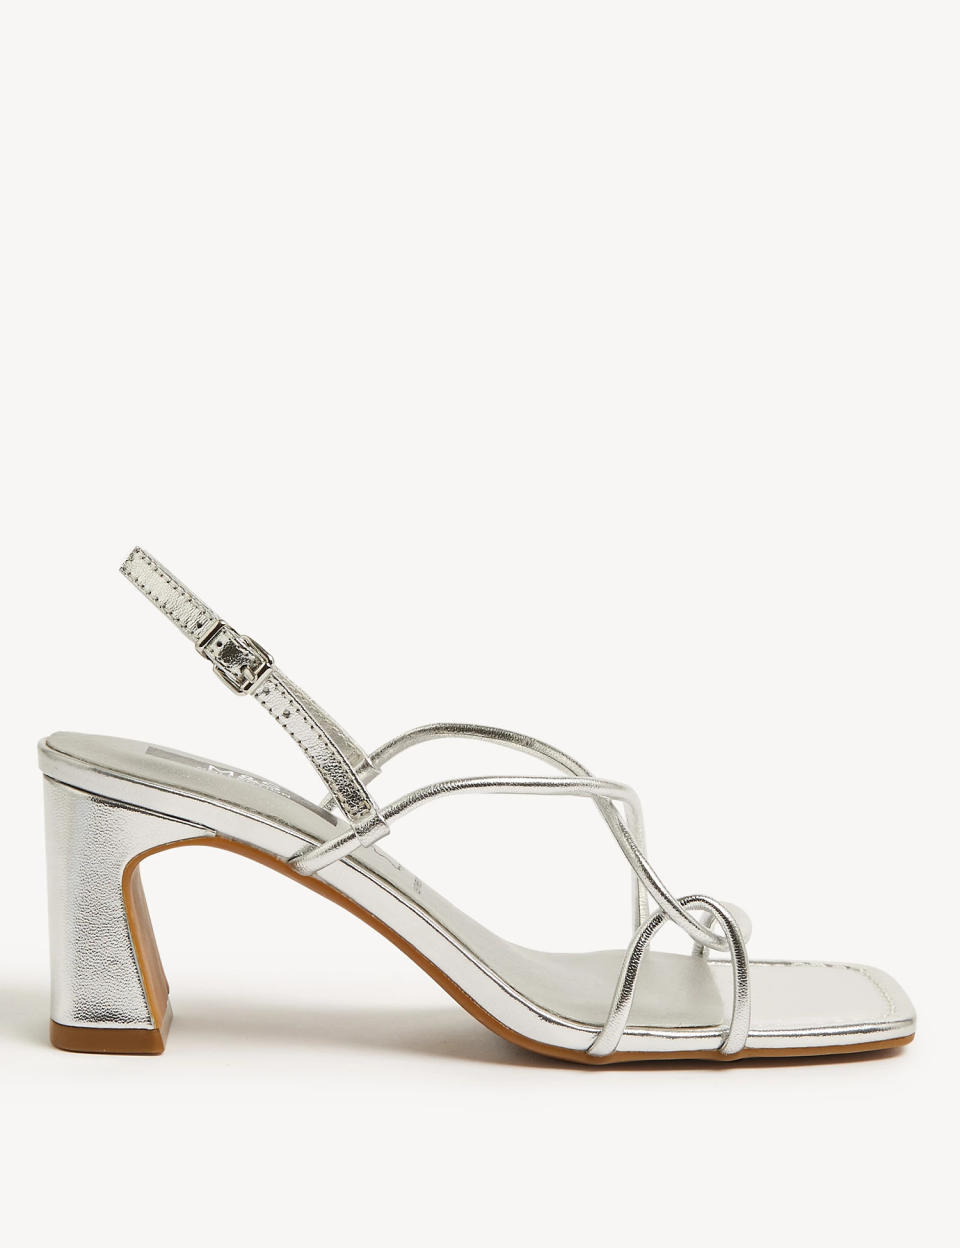 We've found the perfect wedding guest shoes. (Marks & Spencer)